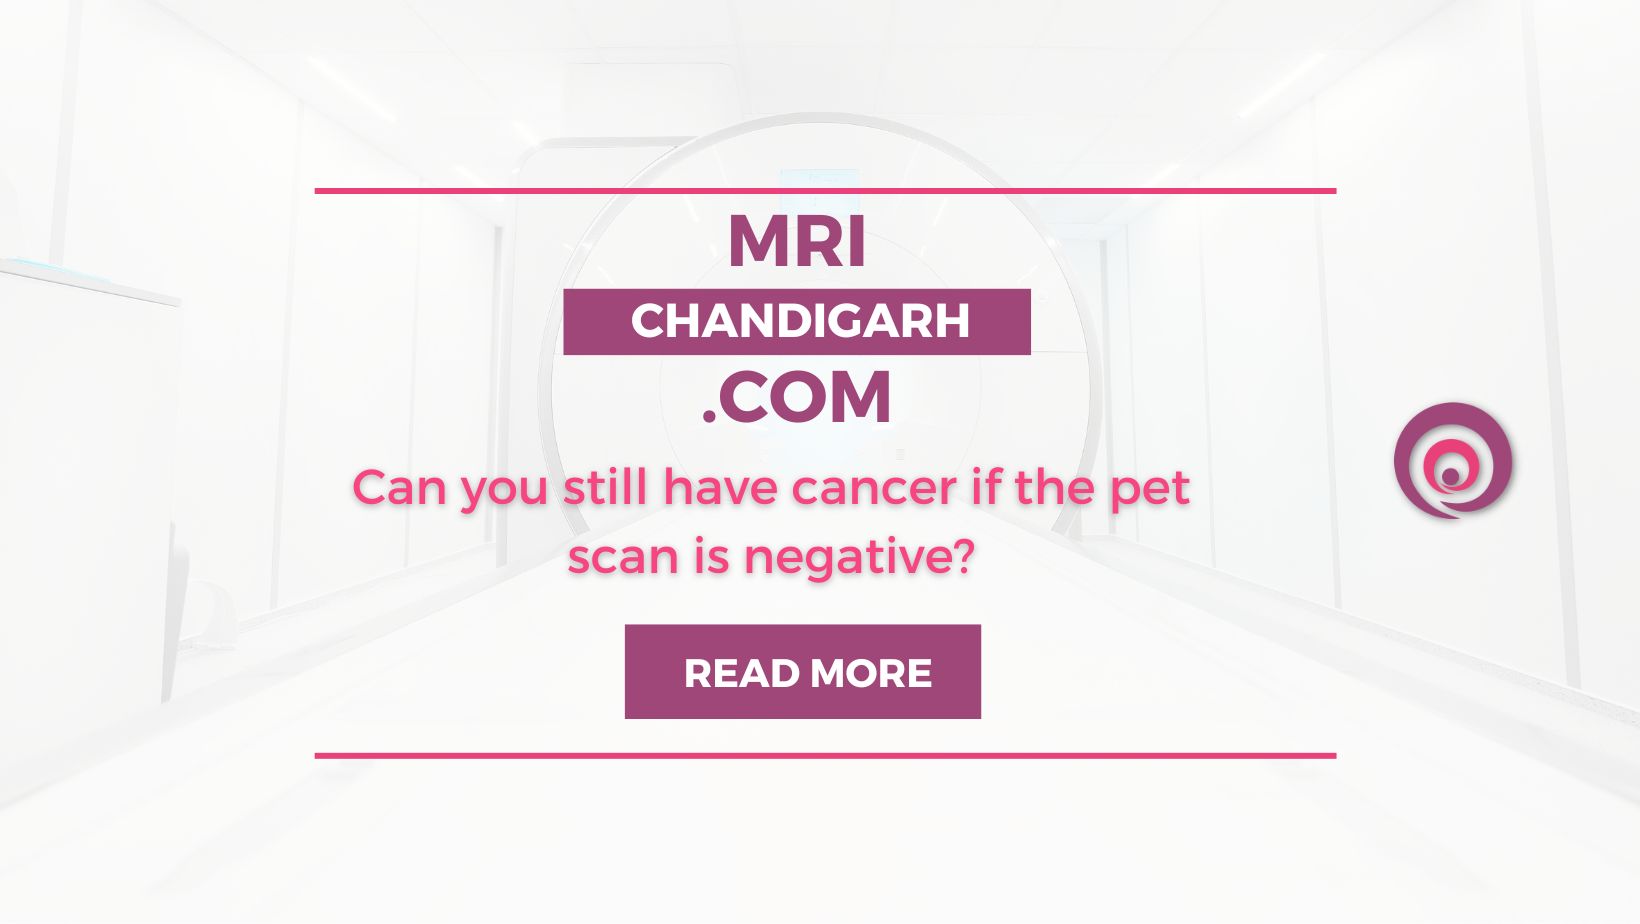 Can you still have cancer if the pet scan is negative?